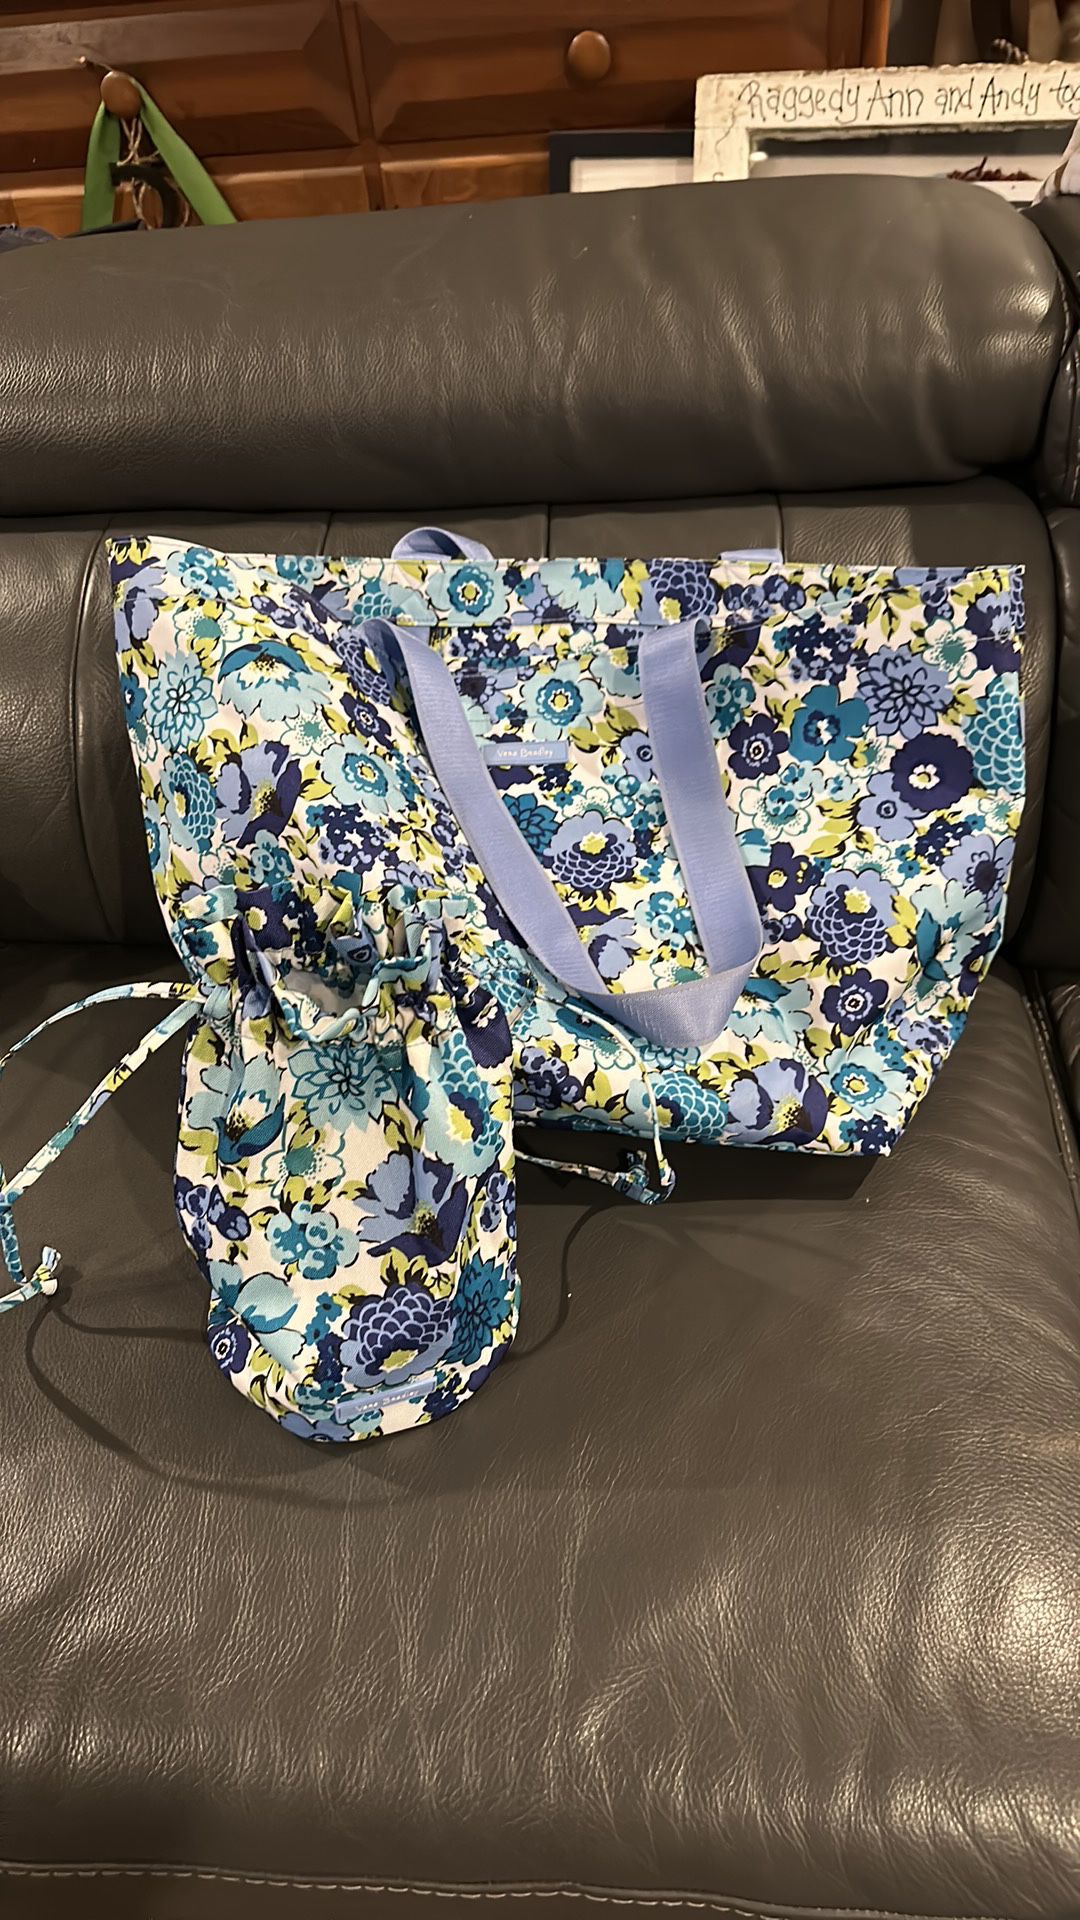  New Vera Bradley Tote And Lunch Bag